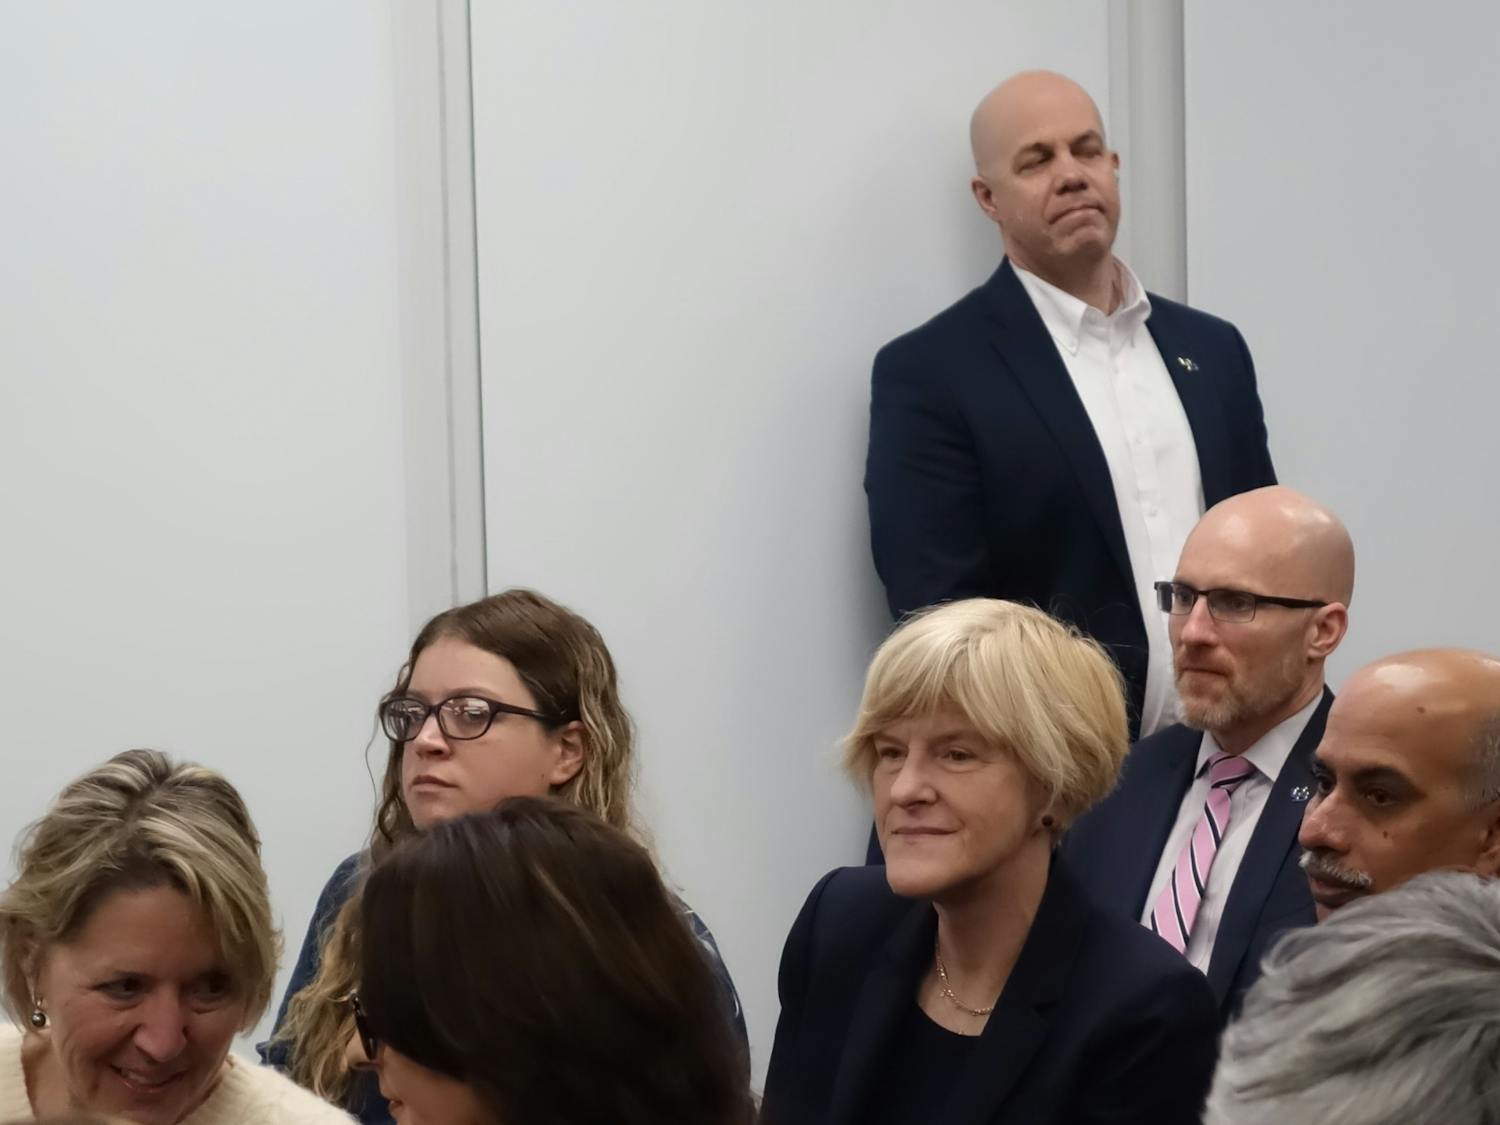 College of Arts and Sciences Dean Robin Schulze (seated, dressed in black) attending a speech given by Senator Chuck Schumer two weeks ago. &nbsp;&nbsp;&nbsp;&nbsp;&nbsp;&nbsp;&nbsp;&nbsp;&nbsp;&nbsp;&nbsp;&nbsp;&nbsp;&nbsp;&nbsp;&nbsp;&nbsp;&nbsp;&nbsp;&nbsp;&nbsp;&nbsp;&nbsp;&nbsp;&nbsp;&nbsp;&nbsp;&nbsp;&nbsp;&nbsp;